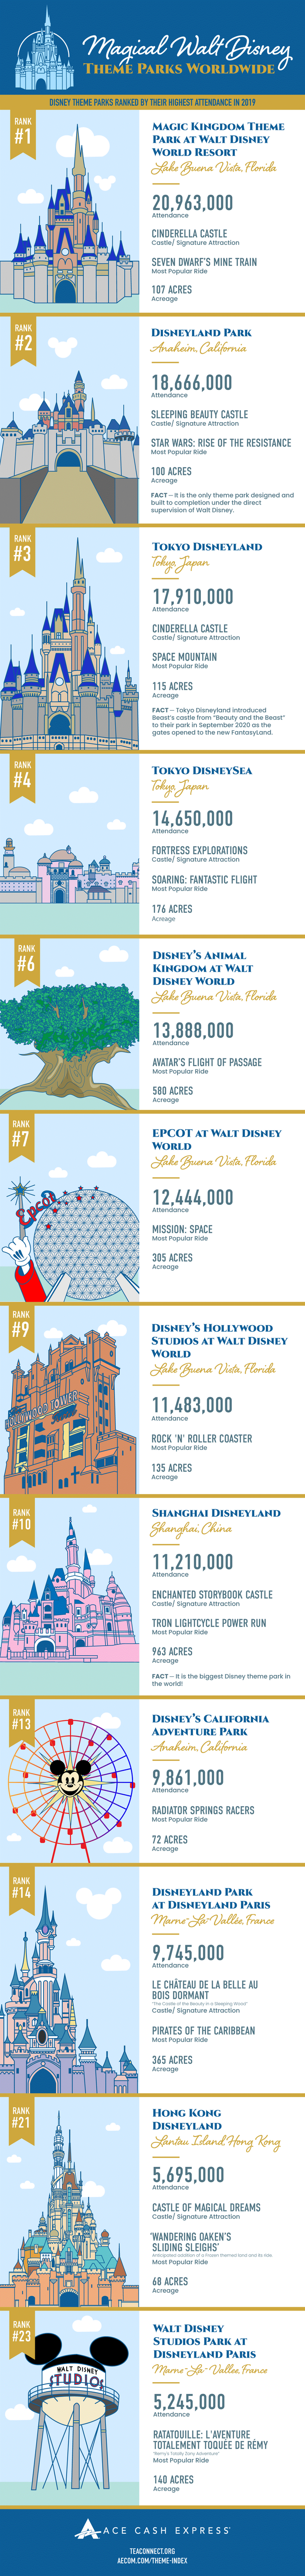 Attendance Rates of the World's Walt Disney Theme Parks Infographic